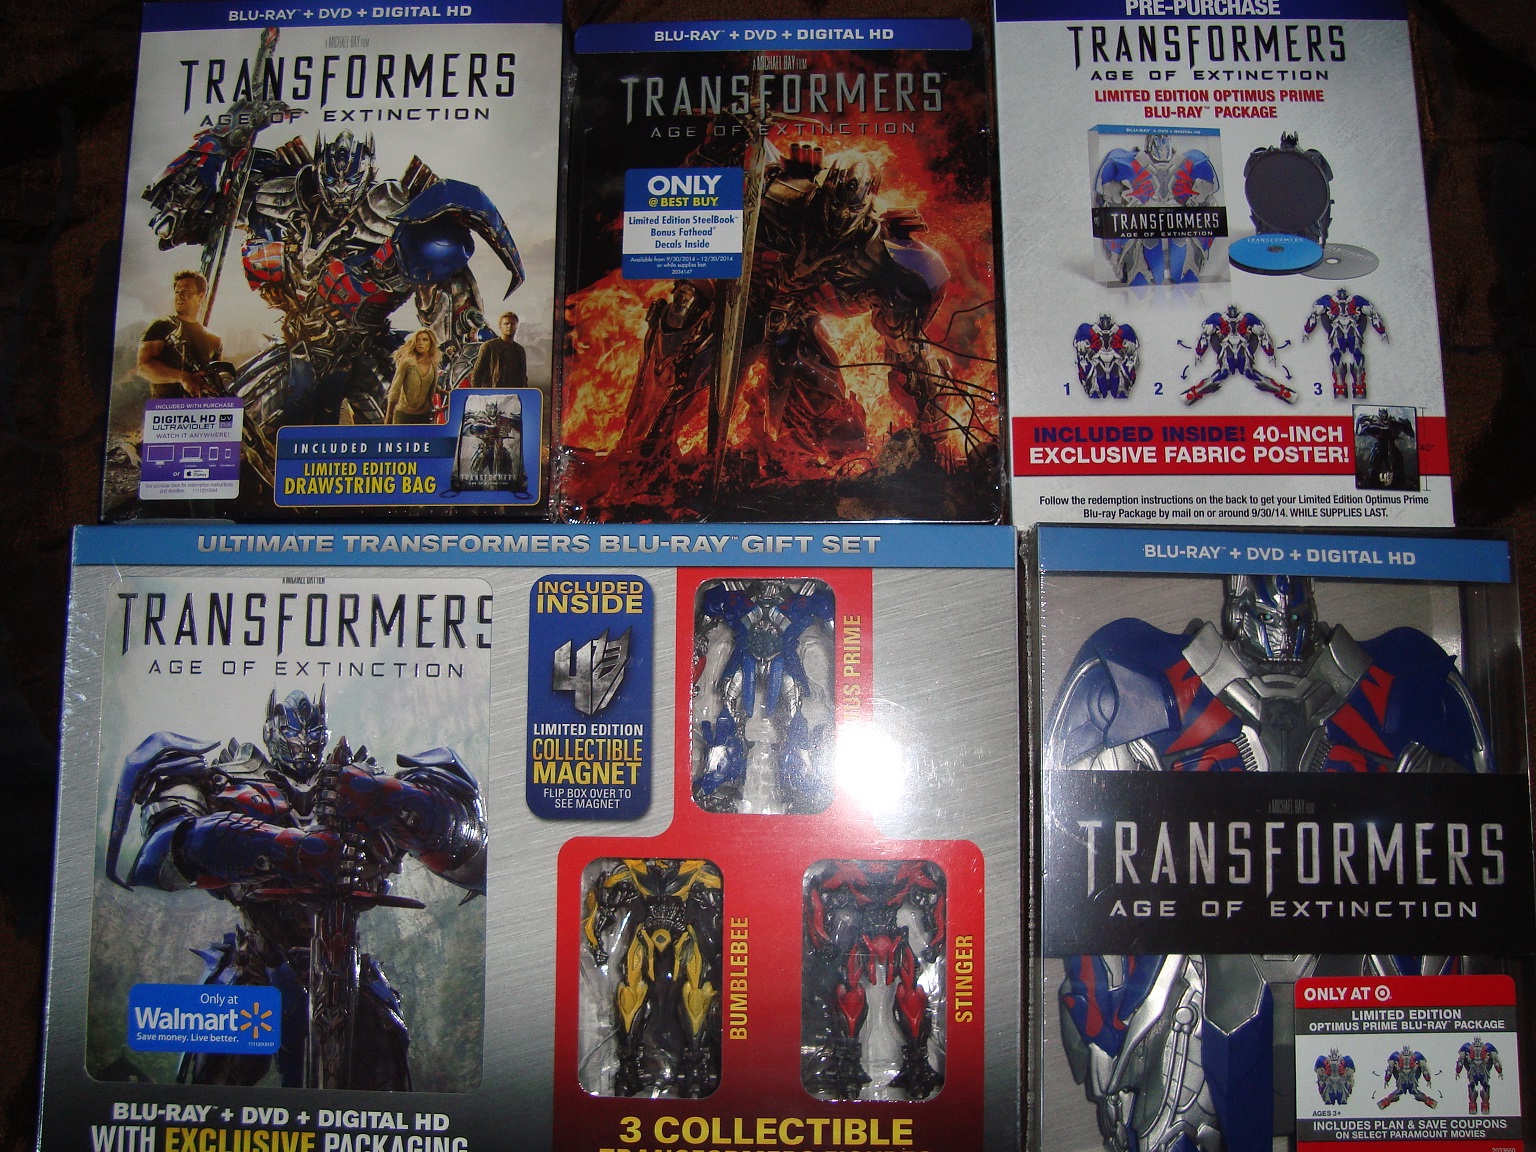 TF4 Exclusives!